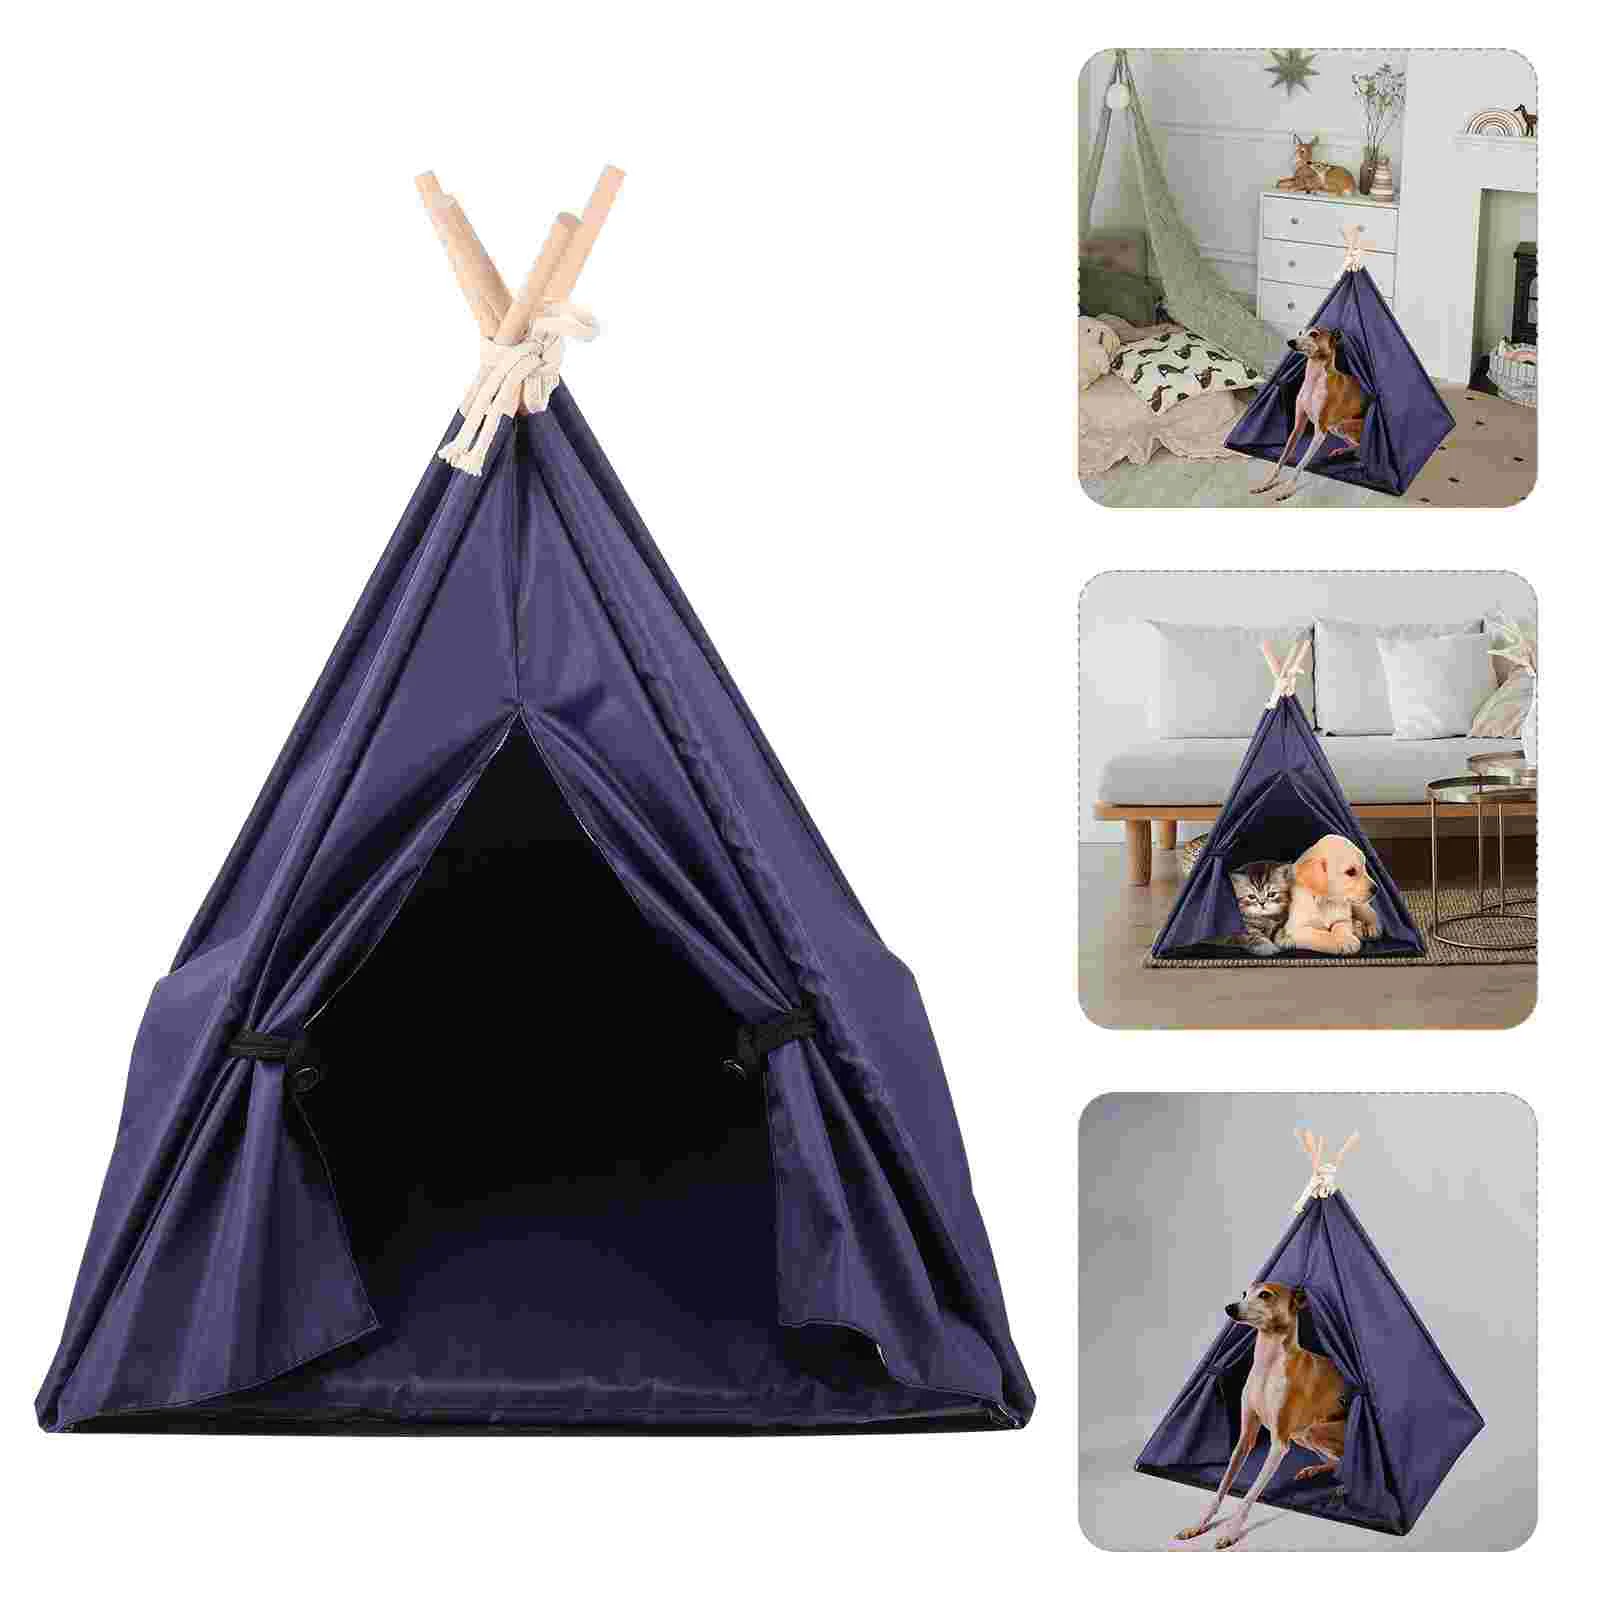 

Tent Dog Cat Teepee Bed Tents Cats Pet Mini Indoor Dogs Large Cave Outdoor Pets House Kitten Hiding Sleeping Camping Tpee Tipi